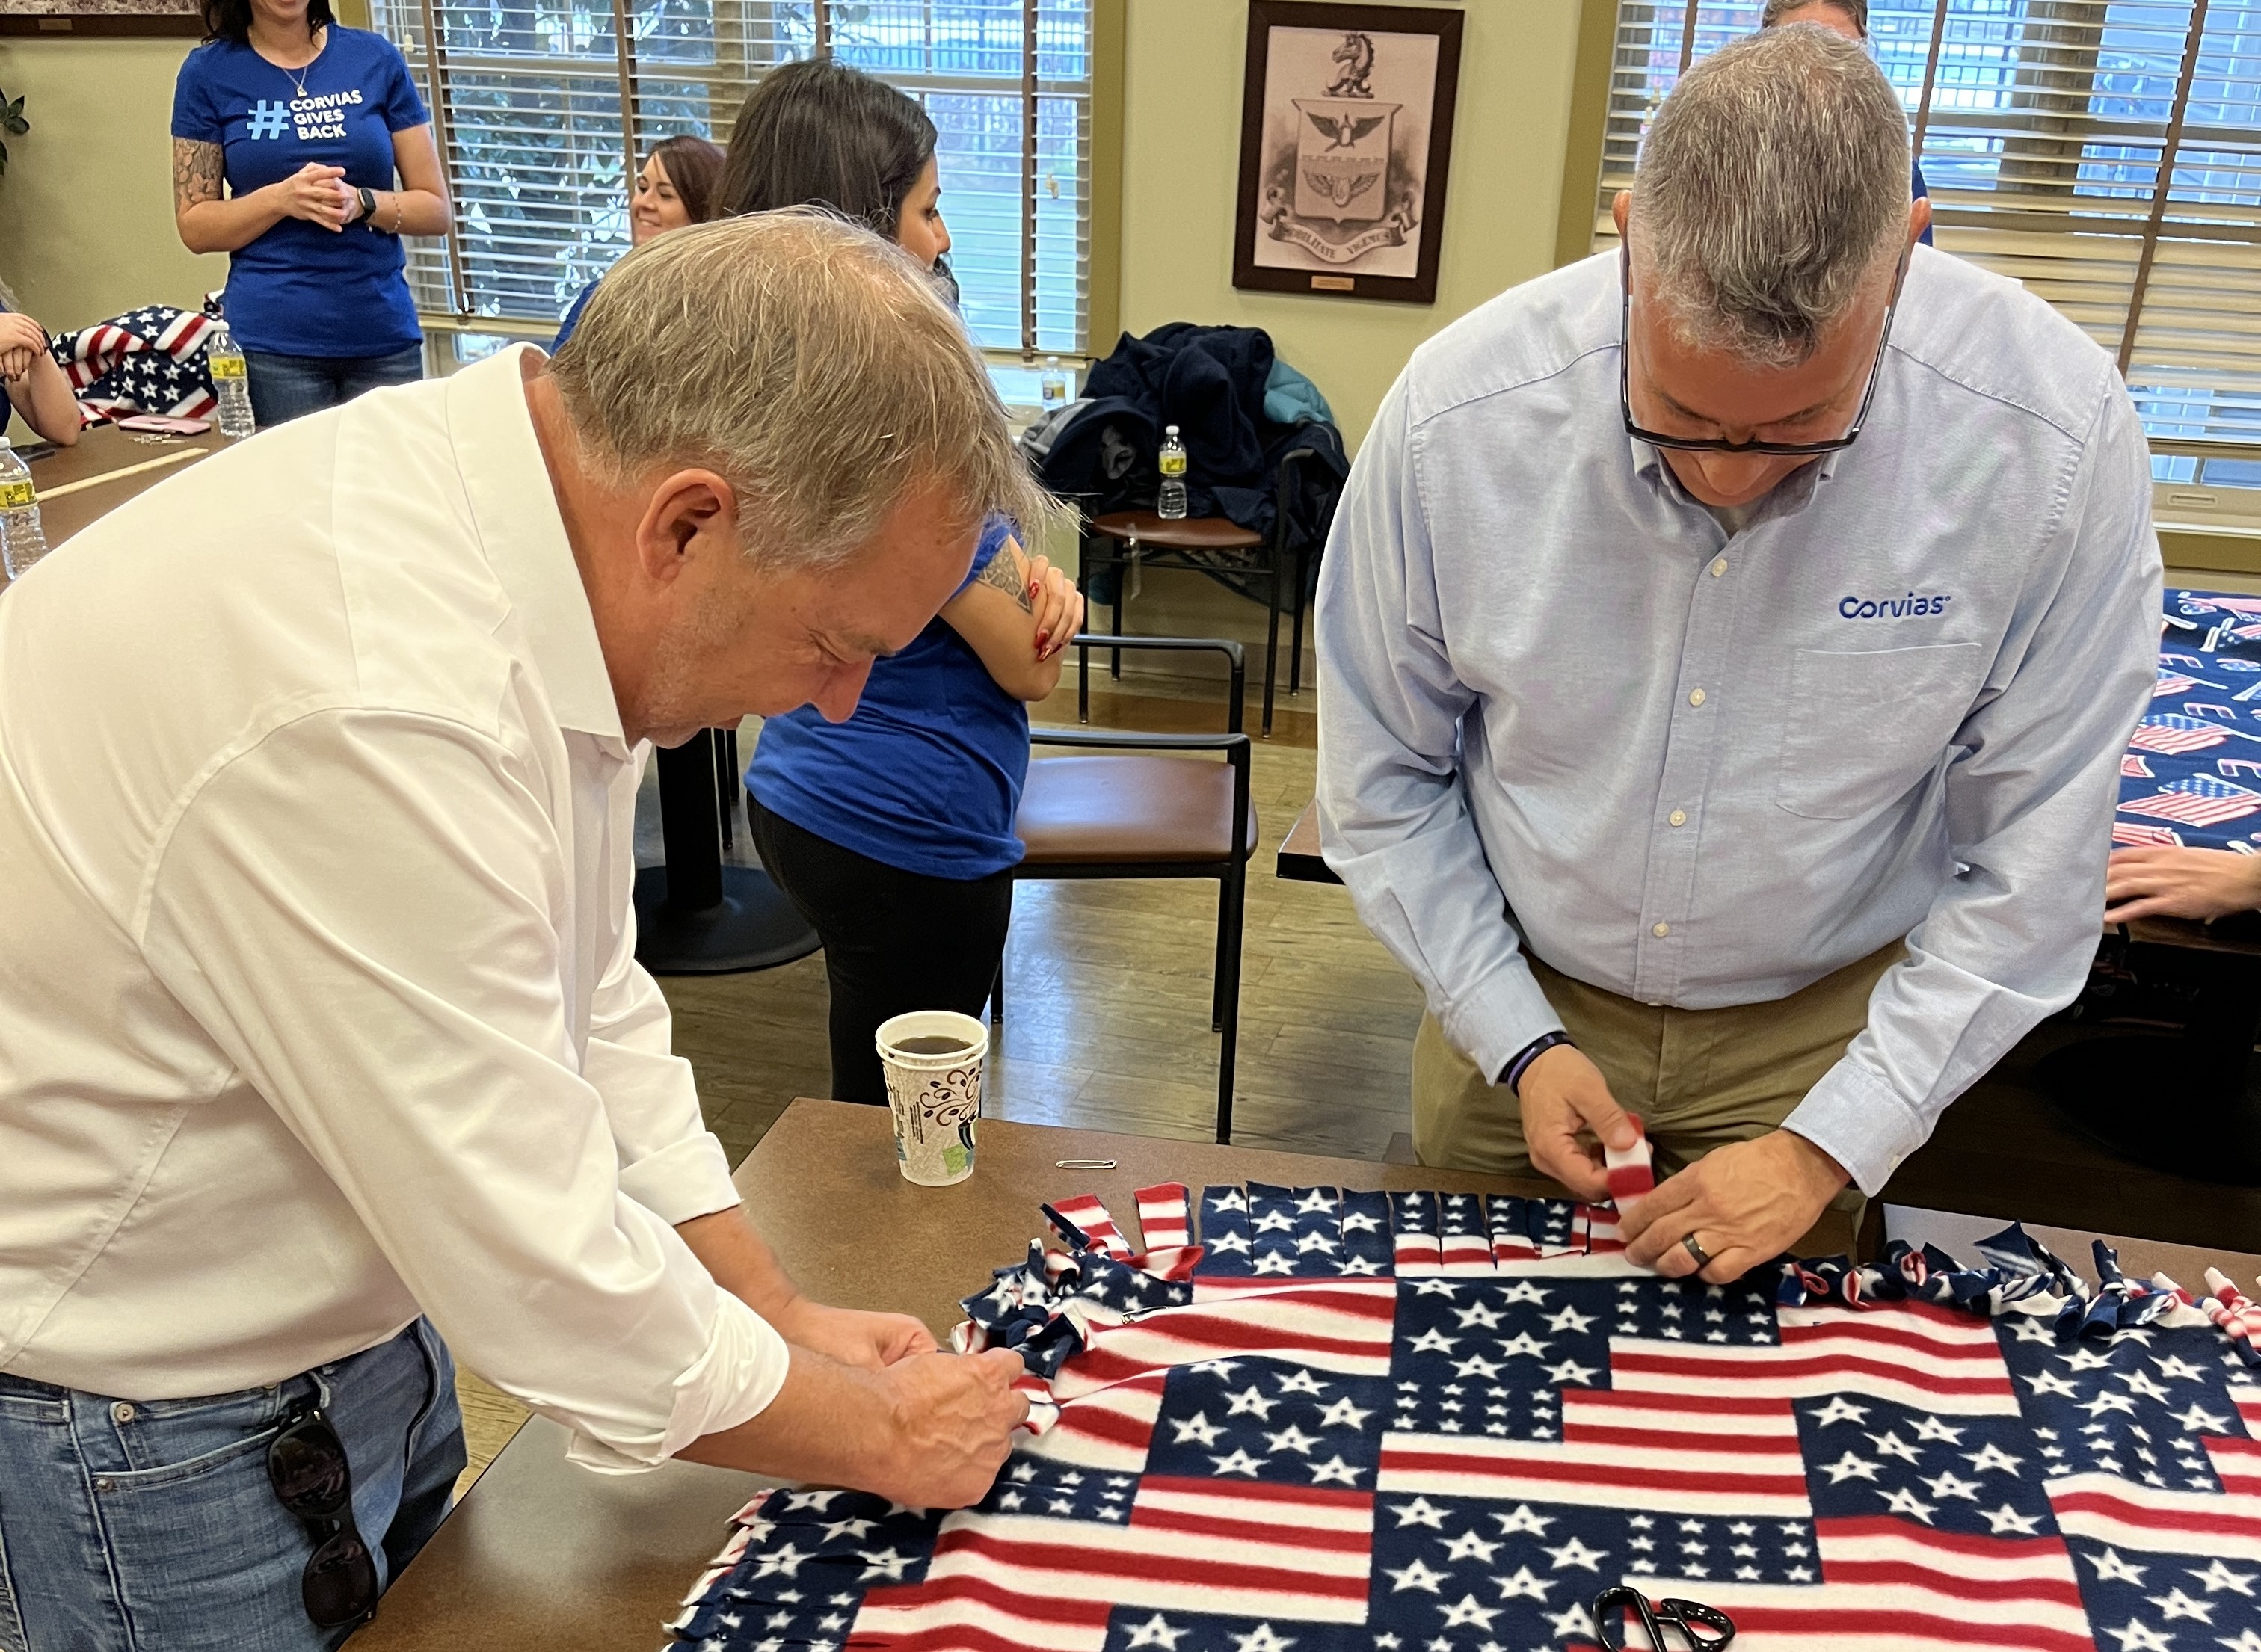 200+ CUSTOM BLANKETS, STOCKINGS FOR FORT RILEY VETERANS AND SOLDIERS 